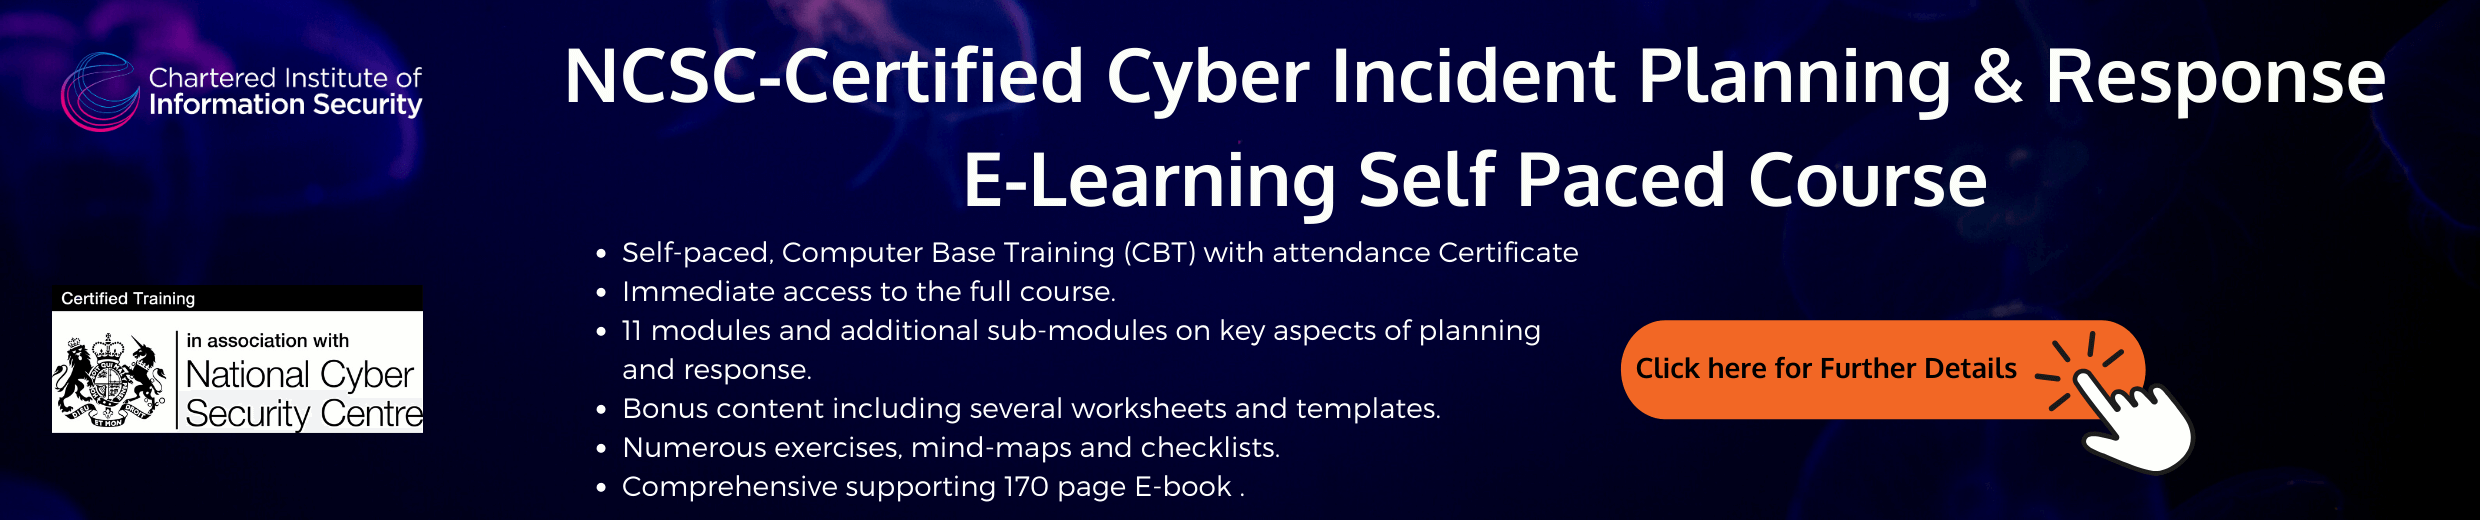 cybersecurity training course